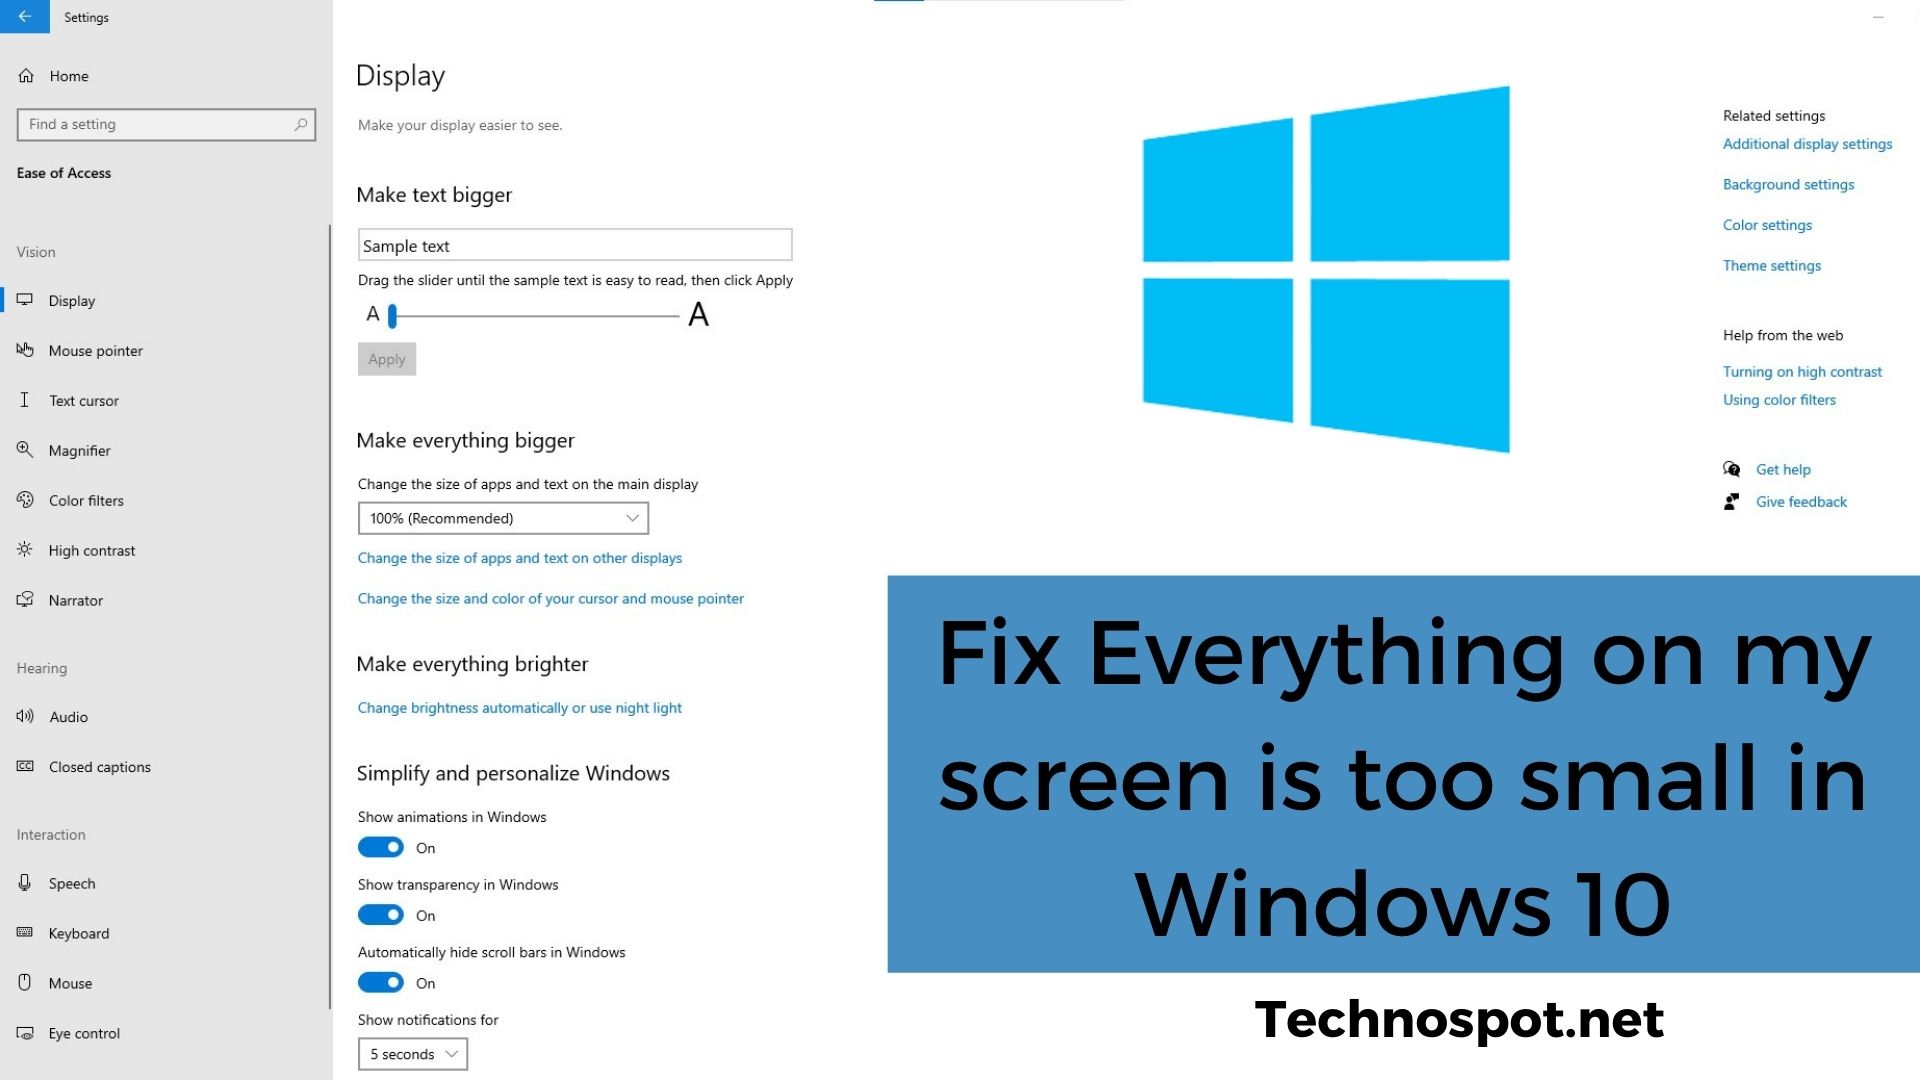 How To Fix Everything On My Screen Is Too Small In Windows 10